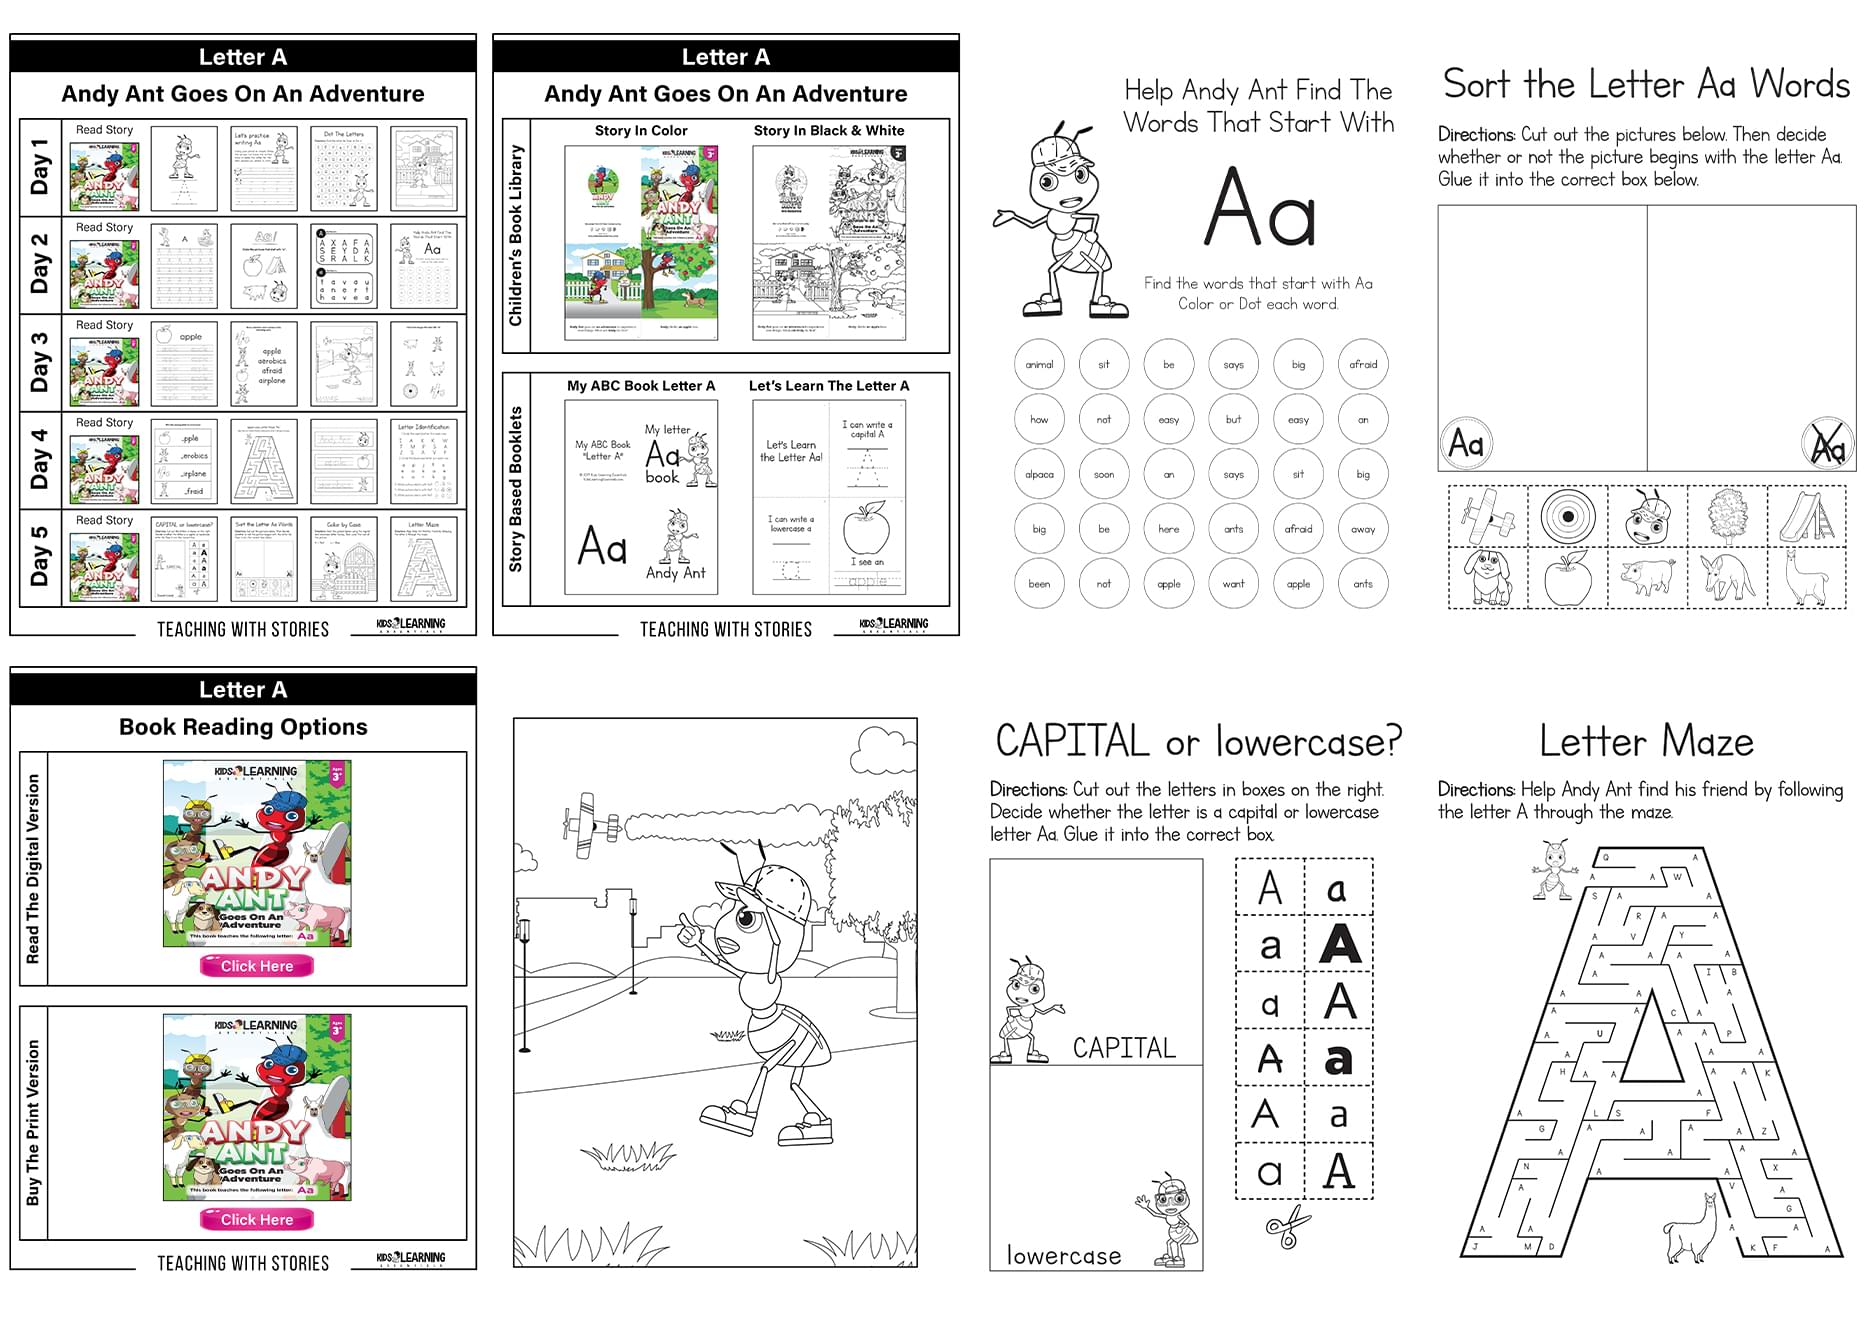 Letter A Weekly Lesson Plan